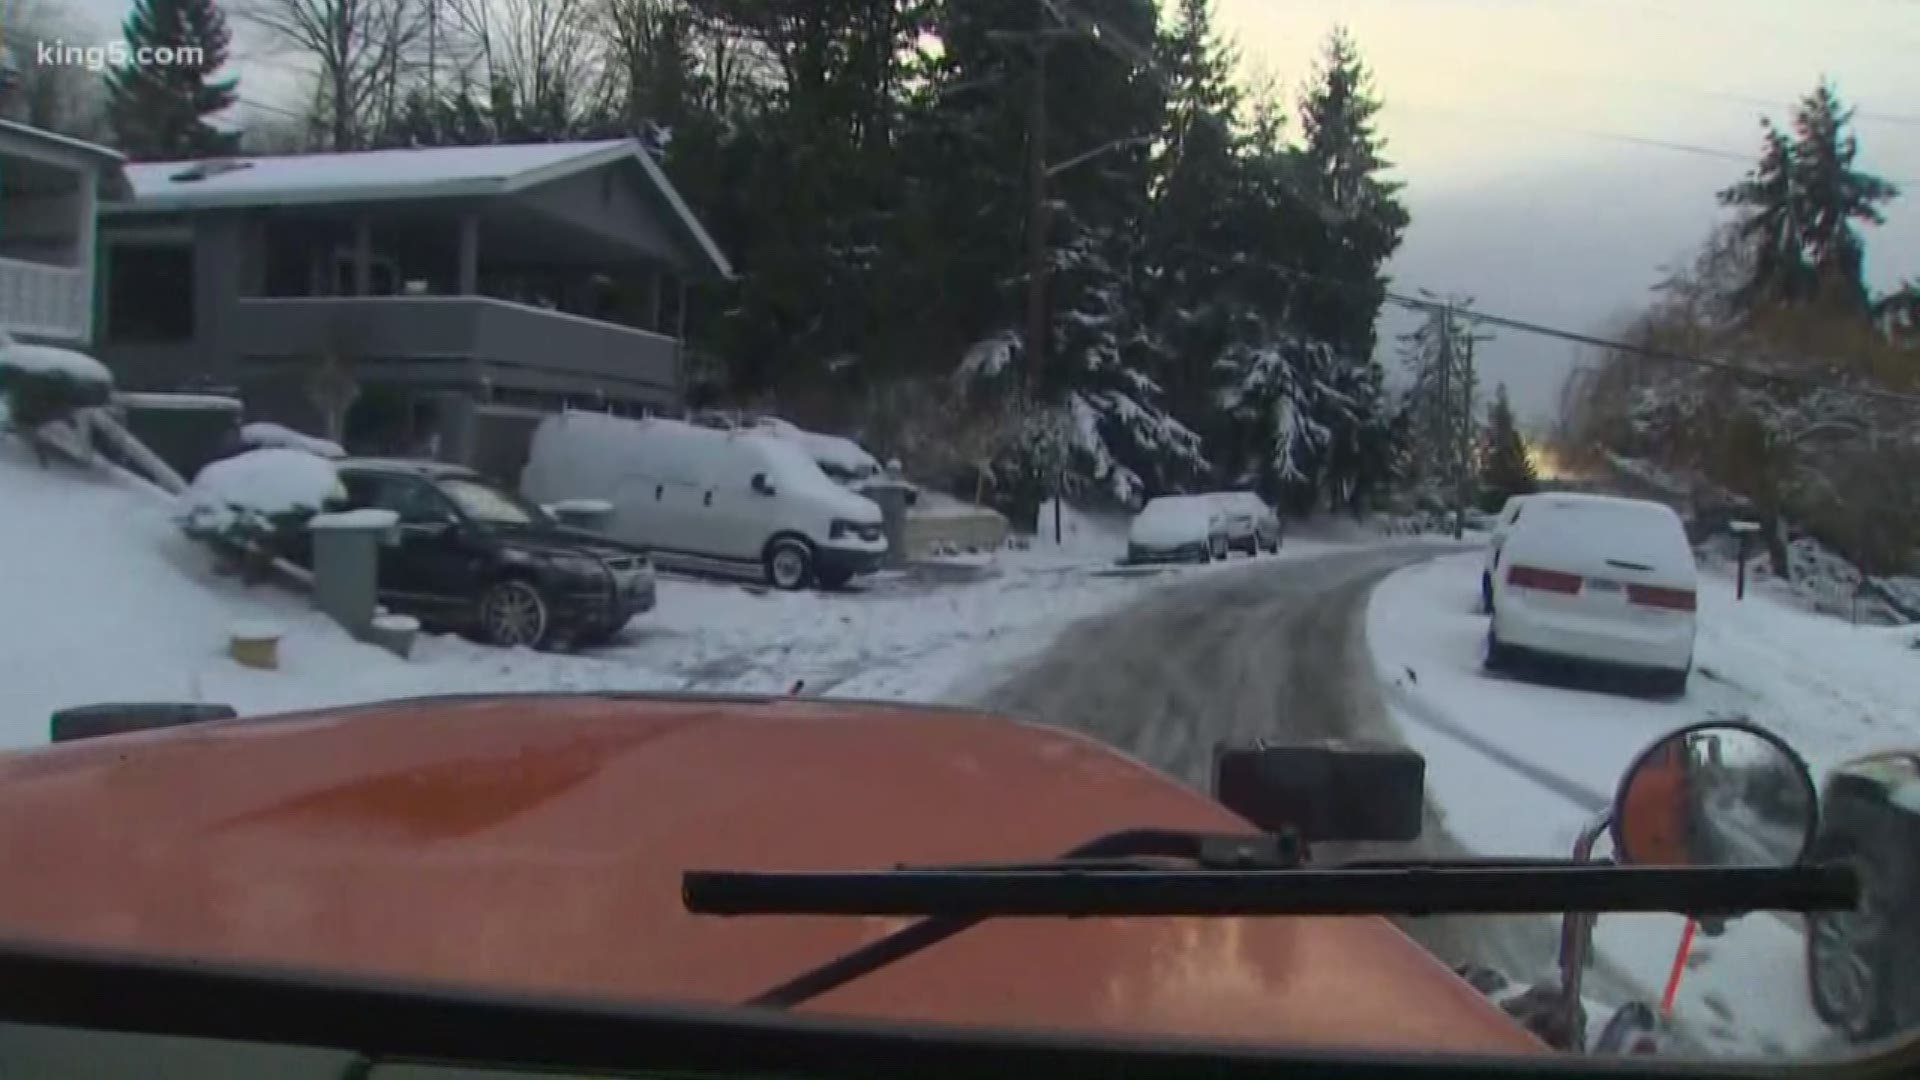 Main roads look good, but neighborhoods are tough to get around. KING 5's Natalie Swaby has the latest.